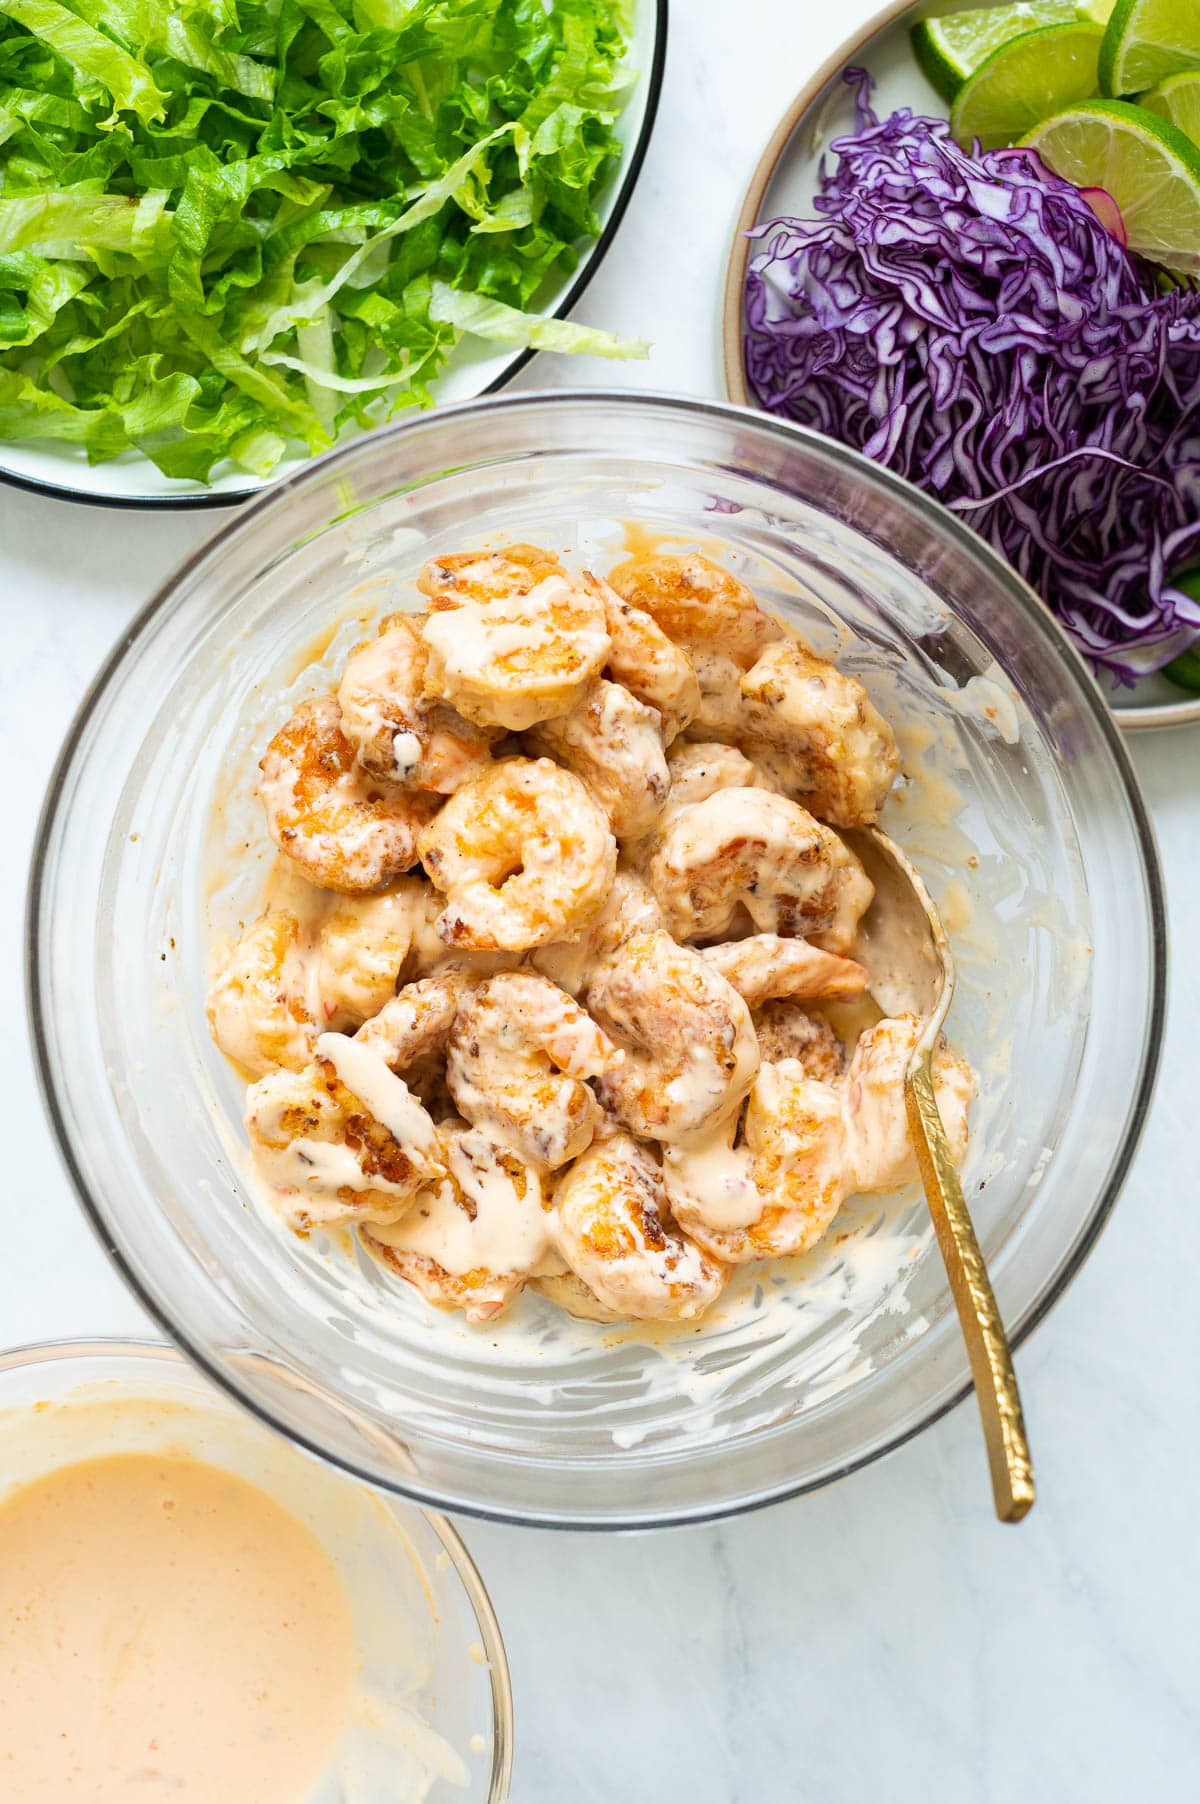 Bang bang shrimp in a bowl with a spoon and lettuce and other toppings around it.